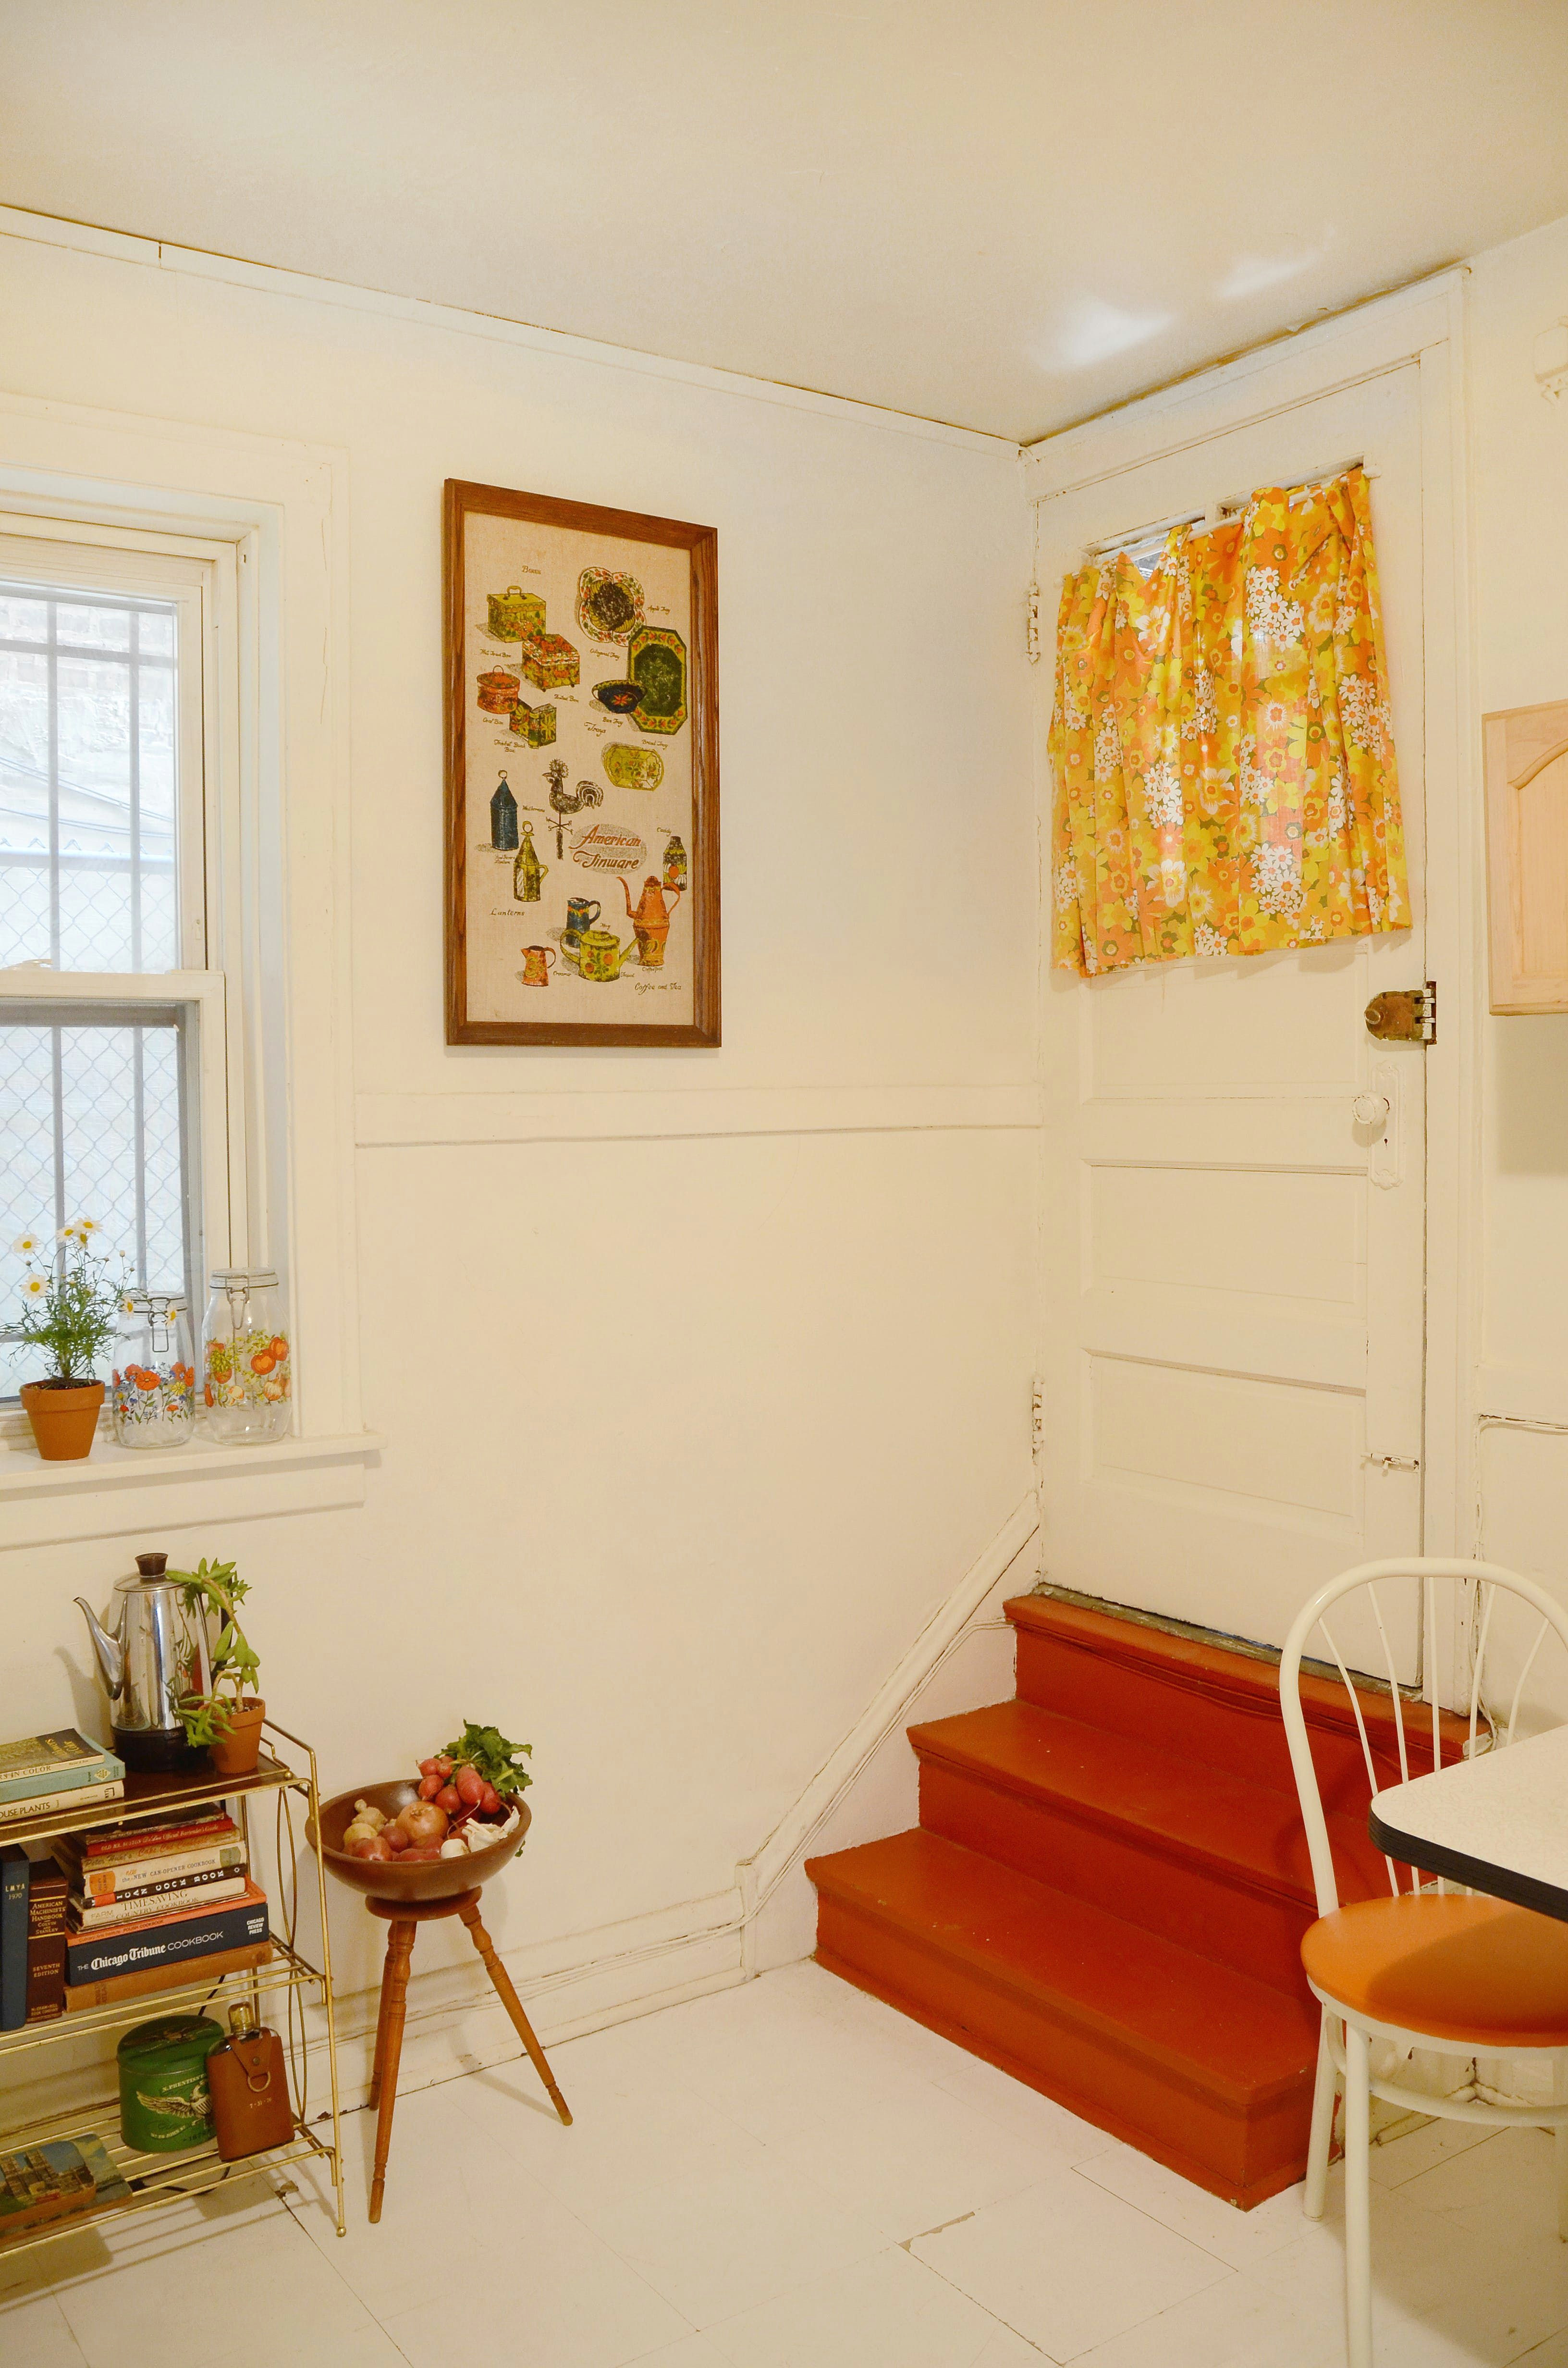 the curtains in the kitchen were made from fabric courtney found at an estate sale